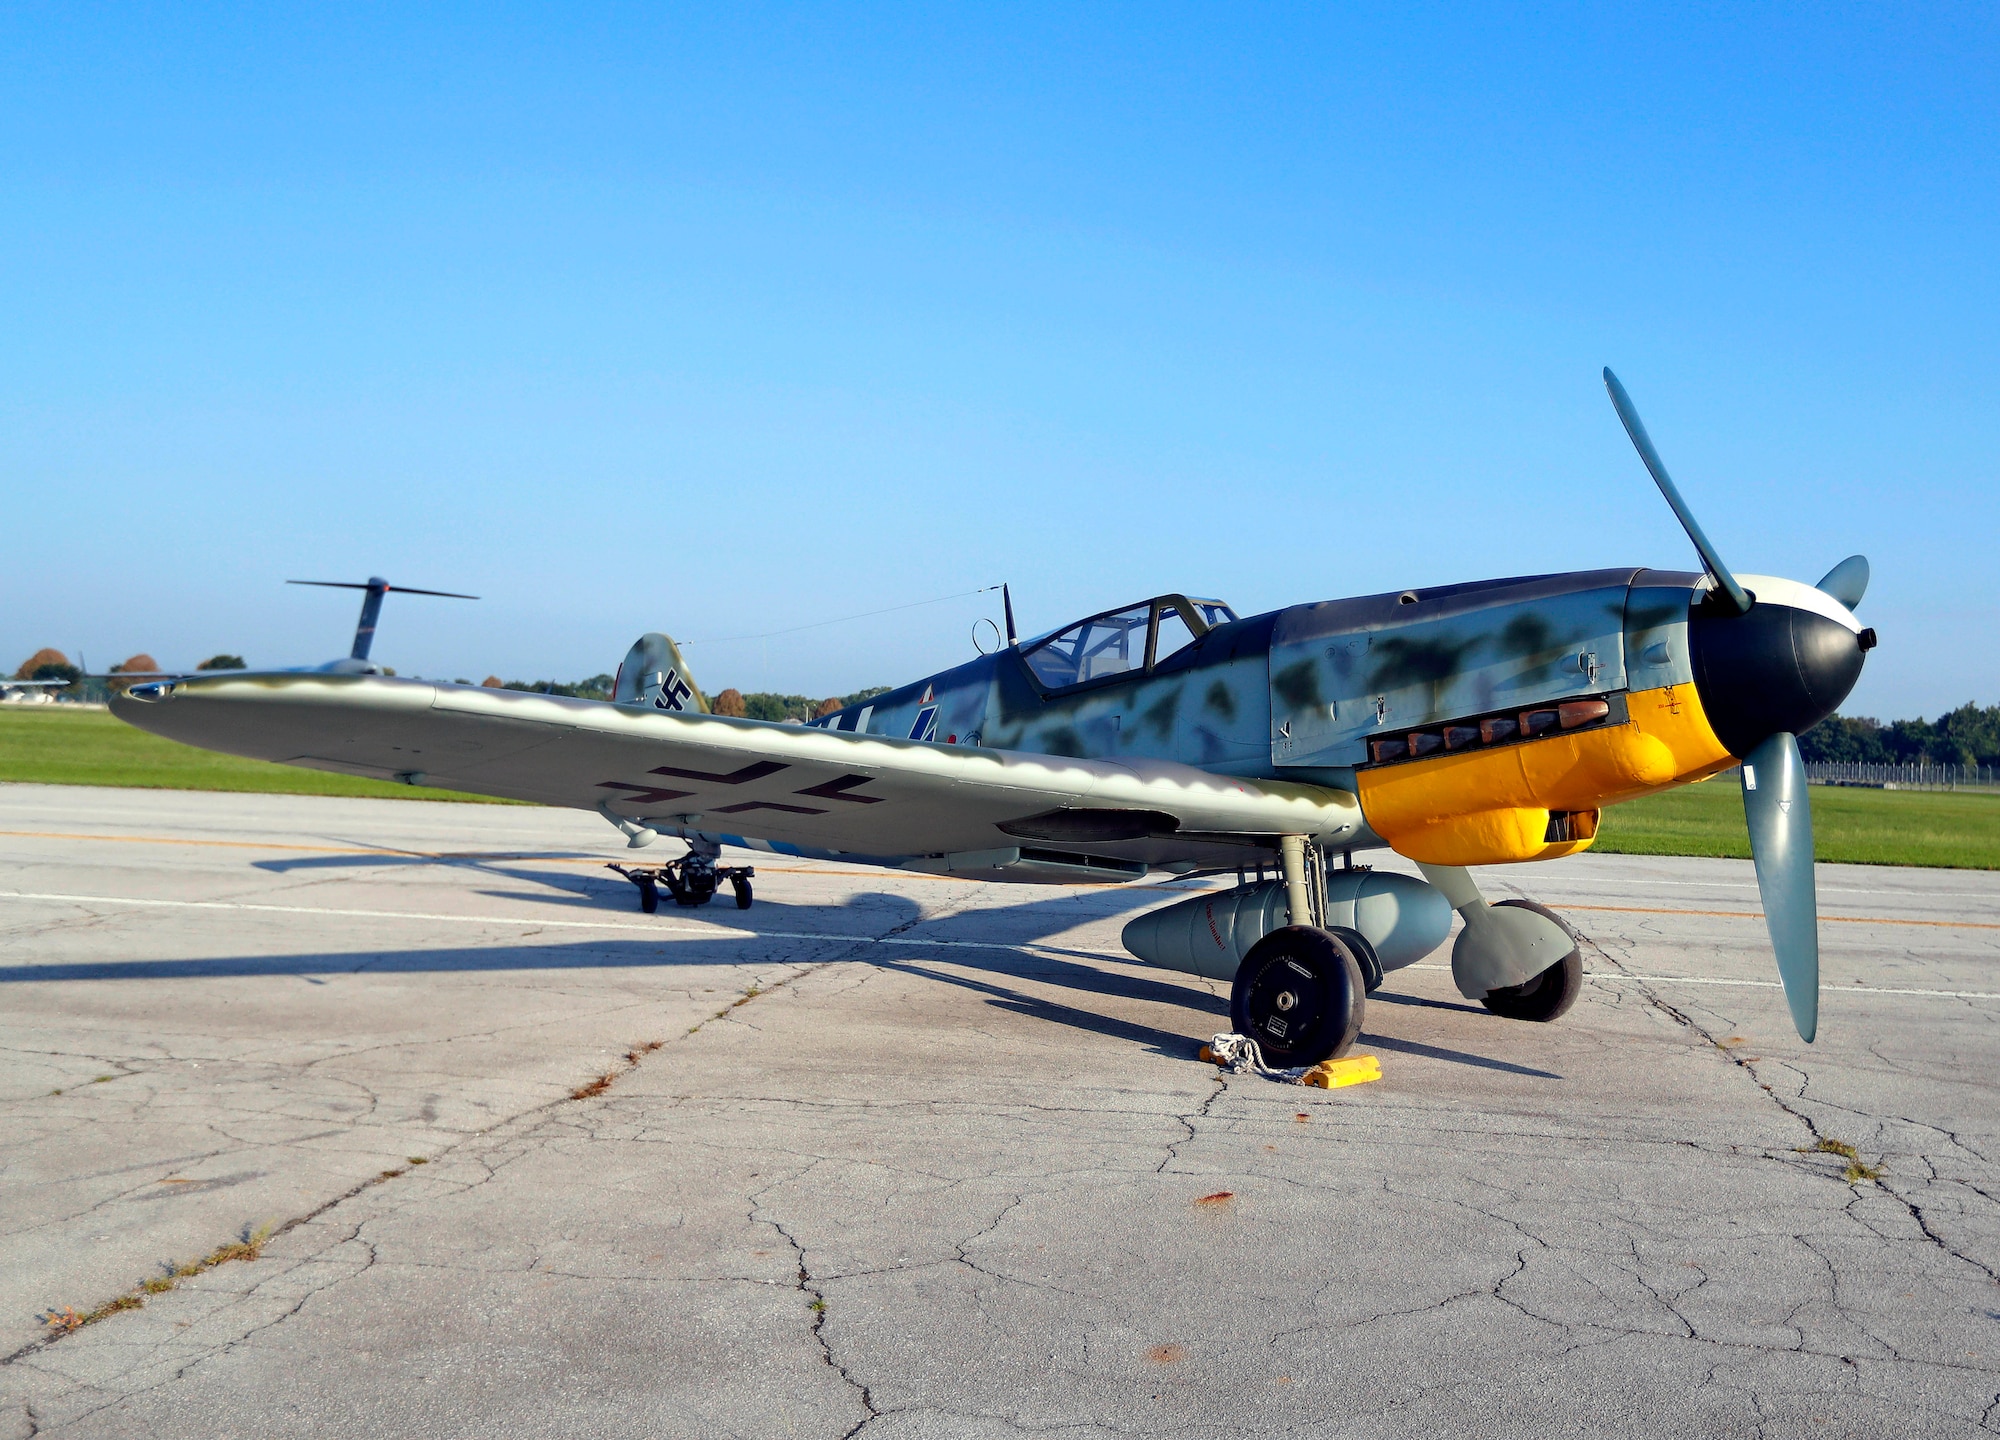 DAYTON, Ohio -- Messerschmitt Bf 109G-10 at the National Museum of the United States Air Force. (Courtesy photo by Don Popp)